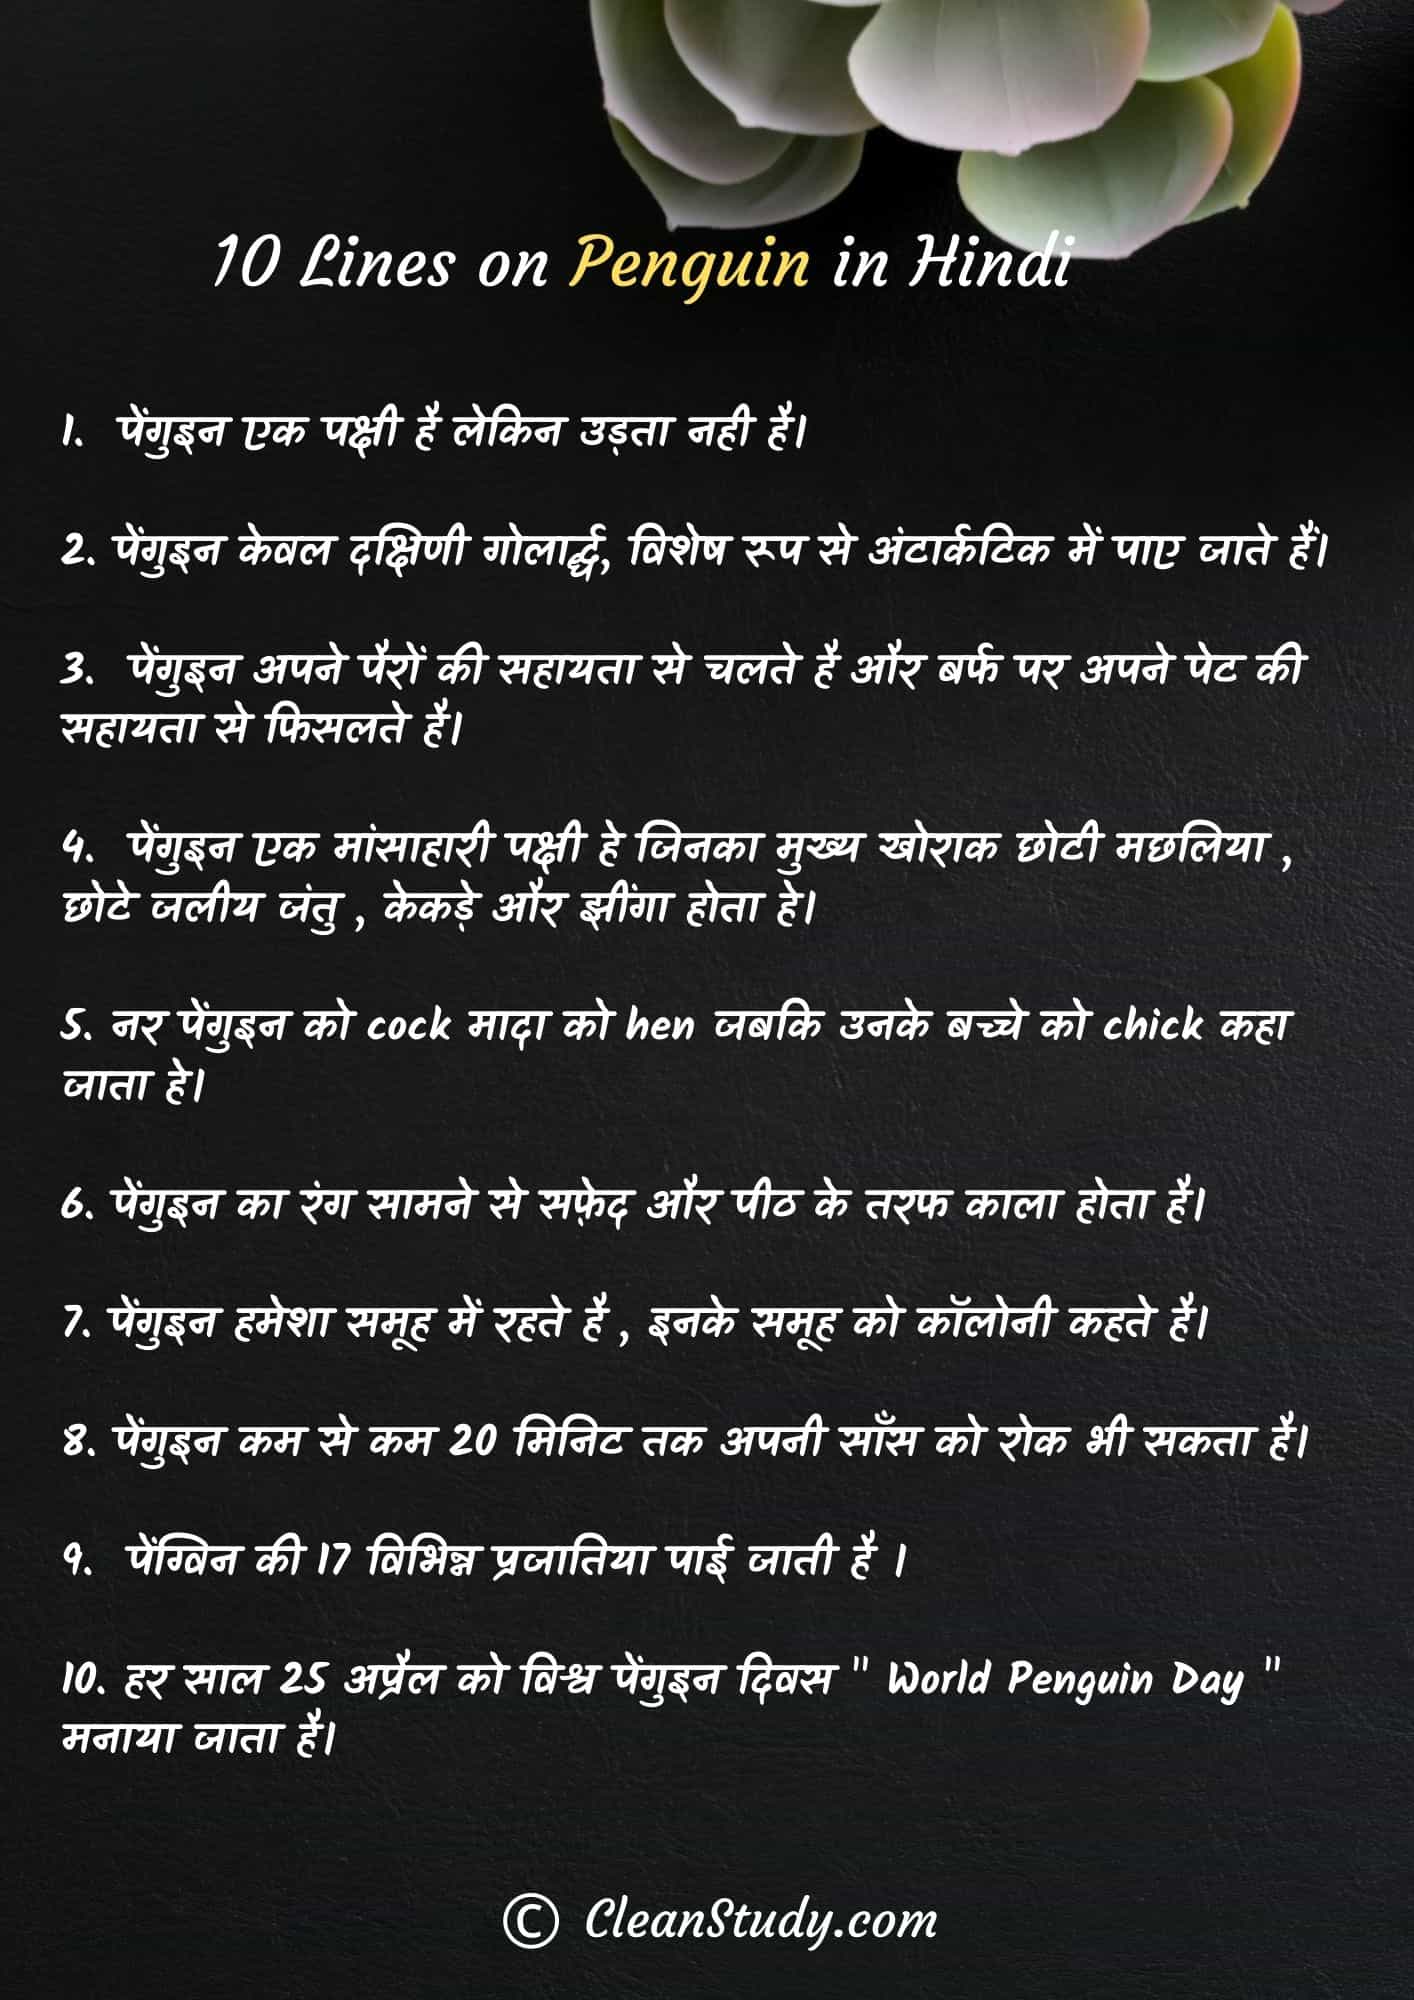 10 Lines on Penguin in Hindi